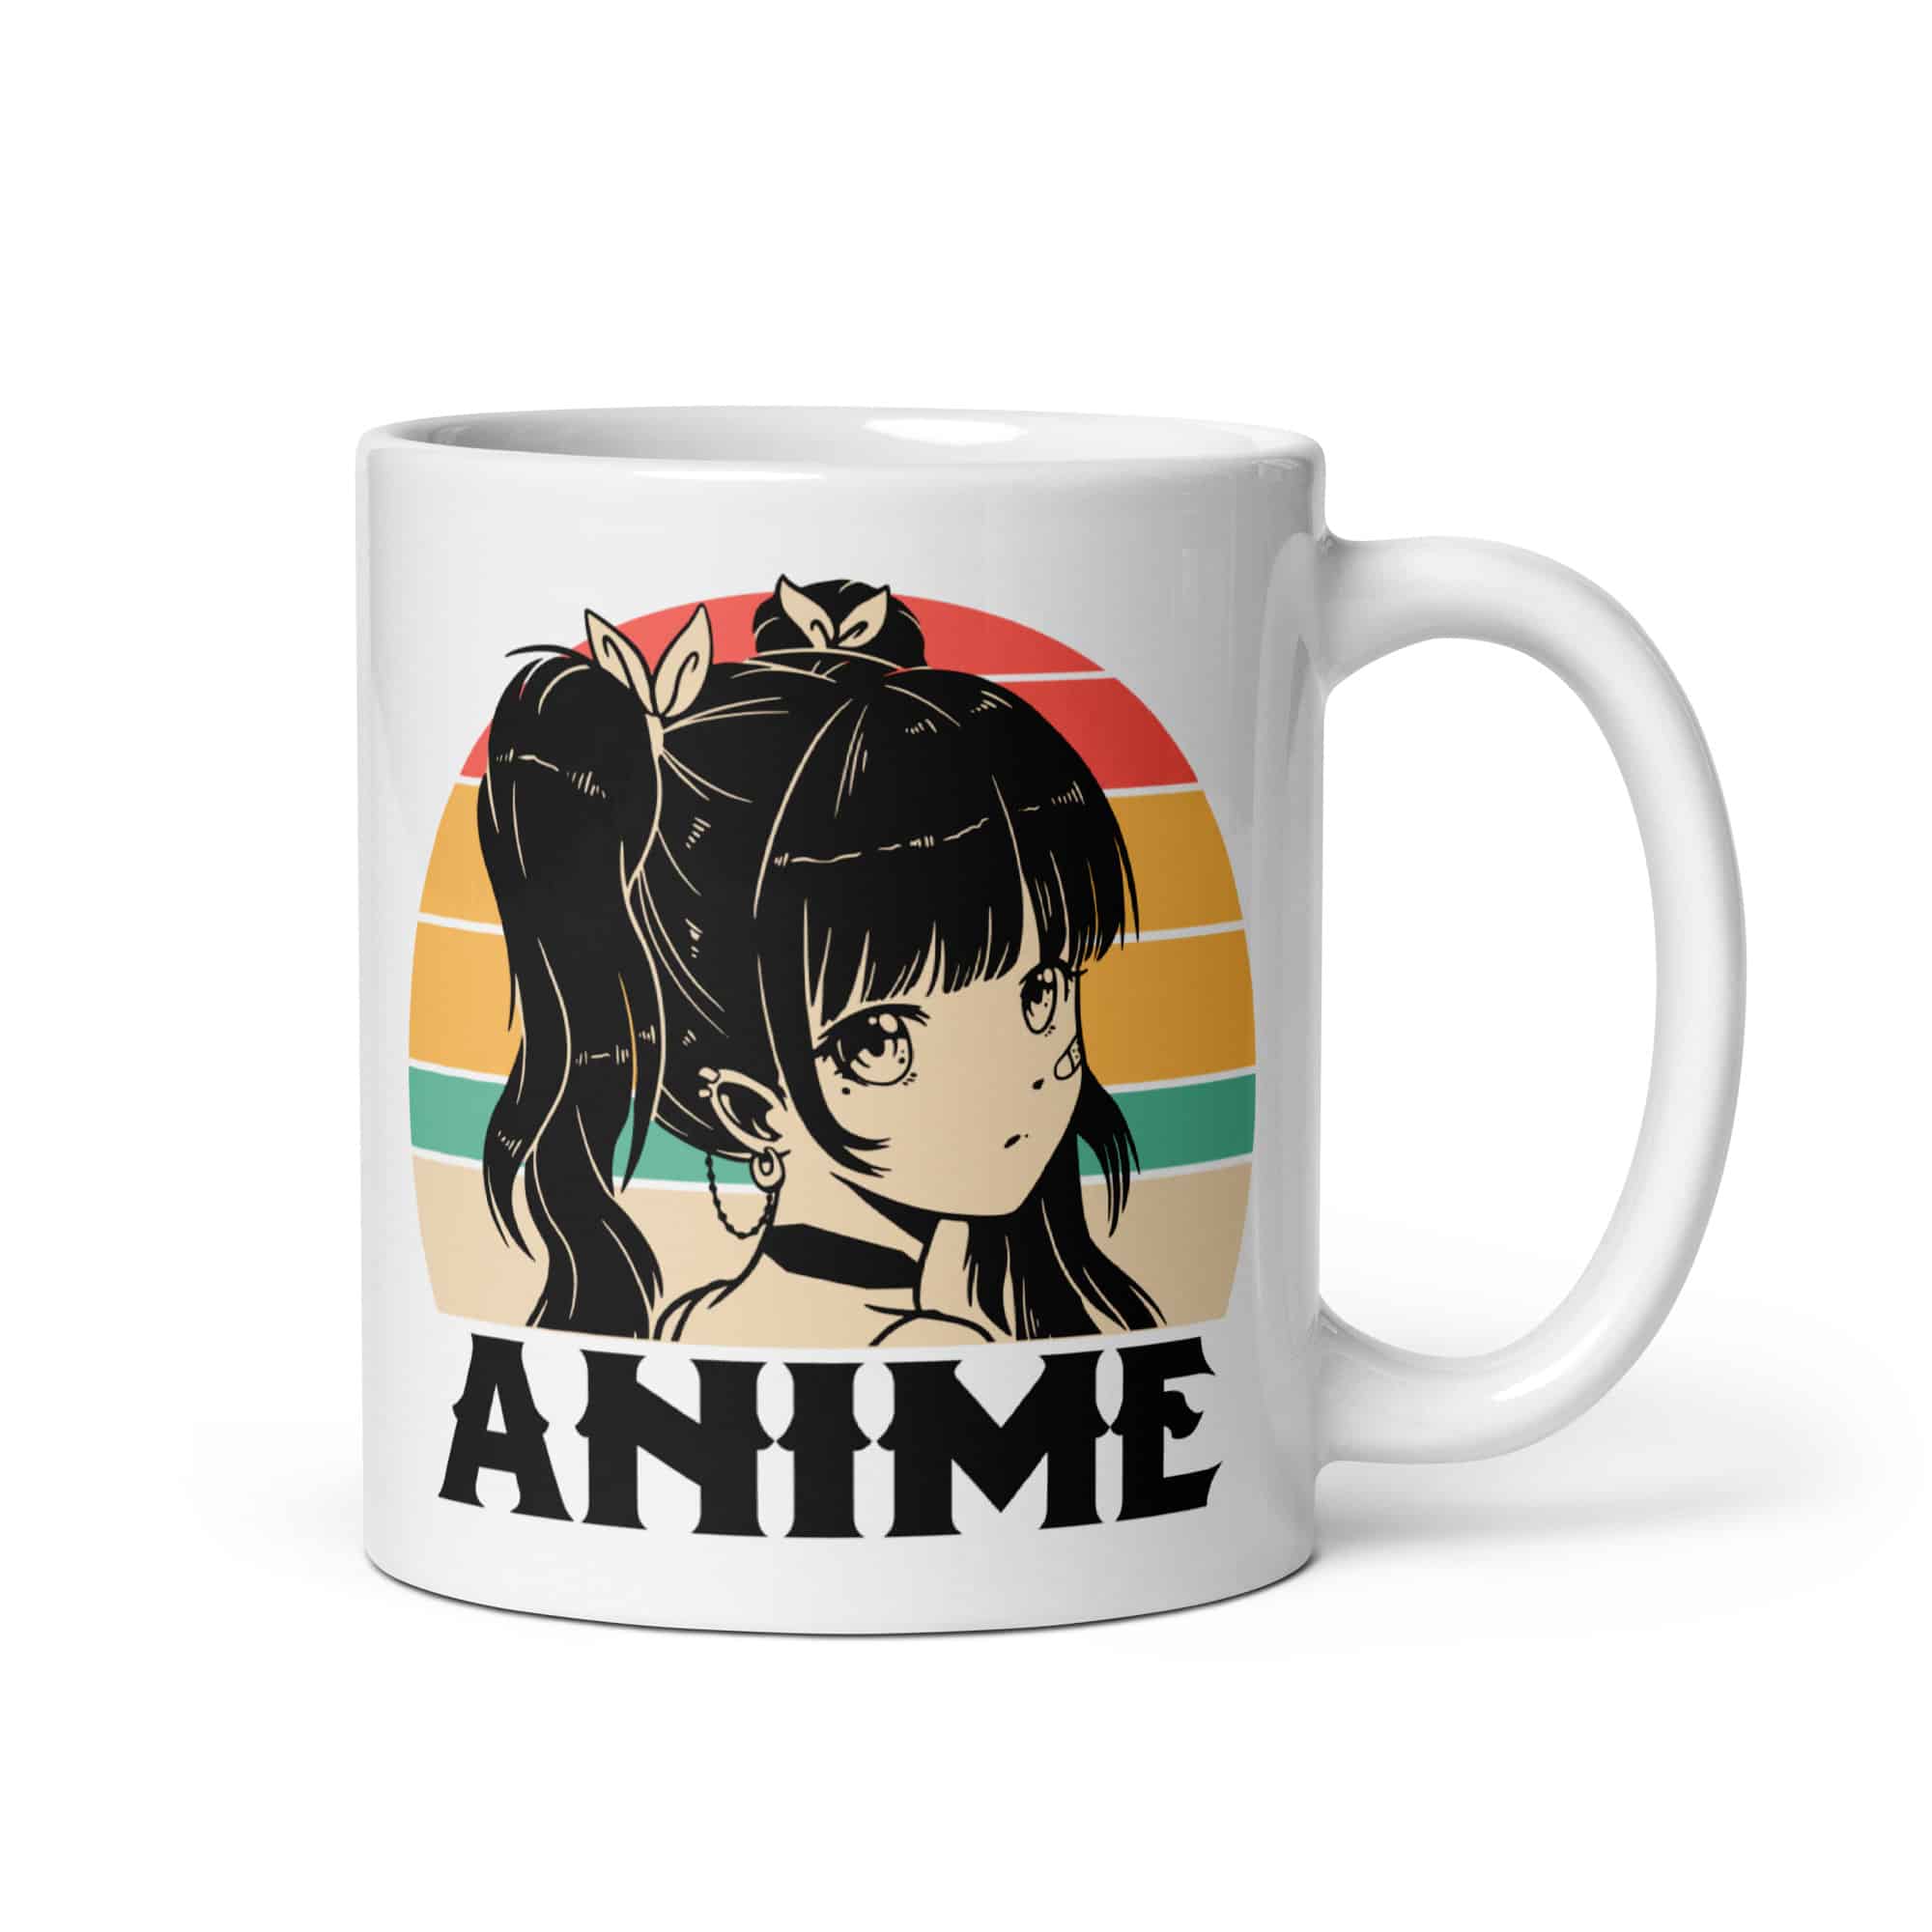 Anime Girl White Glossy Mug Video game store Gaming merchandise Gaming accessories shop Online gaming store Video game shop near me Gaming console store PC gaming store Gaming gear shop Retro gaming shop Board game shop Anime merchandise Anime store online Japanese anime shop Anime figurines Manga shop Anime DVDs Anime accessories Anime apparel Anime collectibles Anime gifts